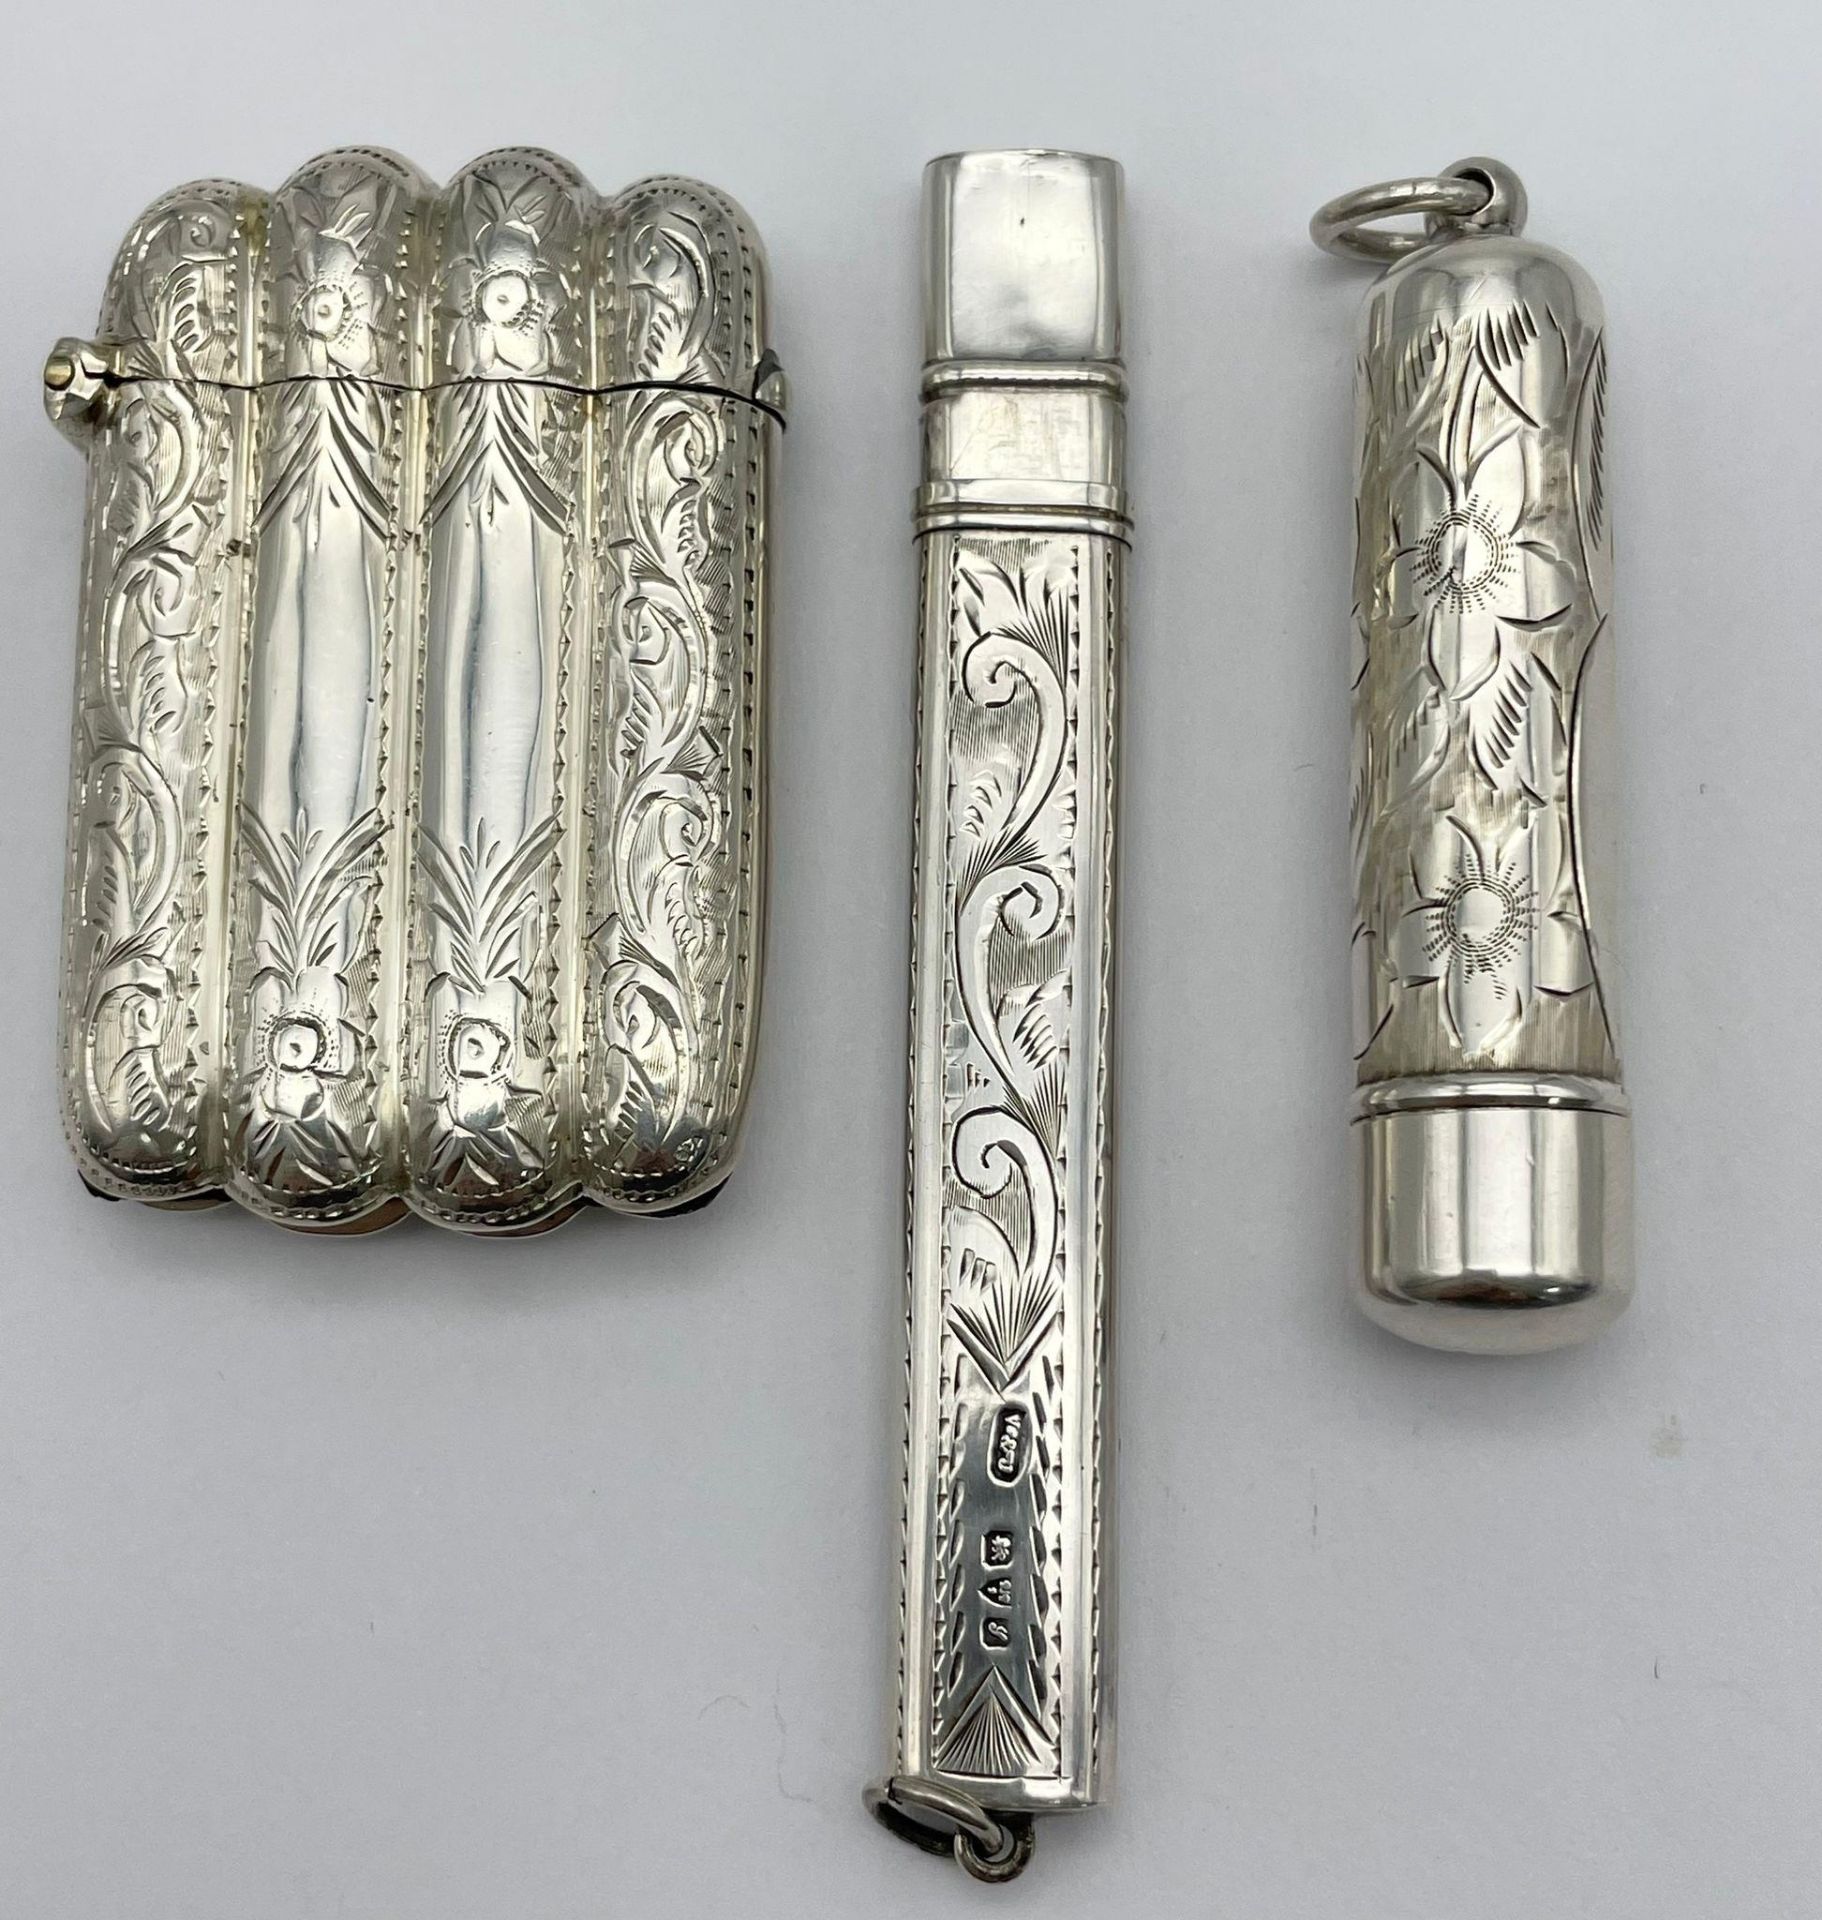 A Silver Selection to Include, A Silver Pencil Holder with Original Pencil, A Silver Cheroot and